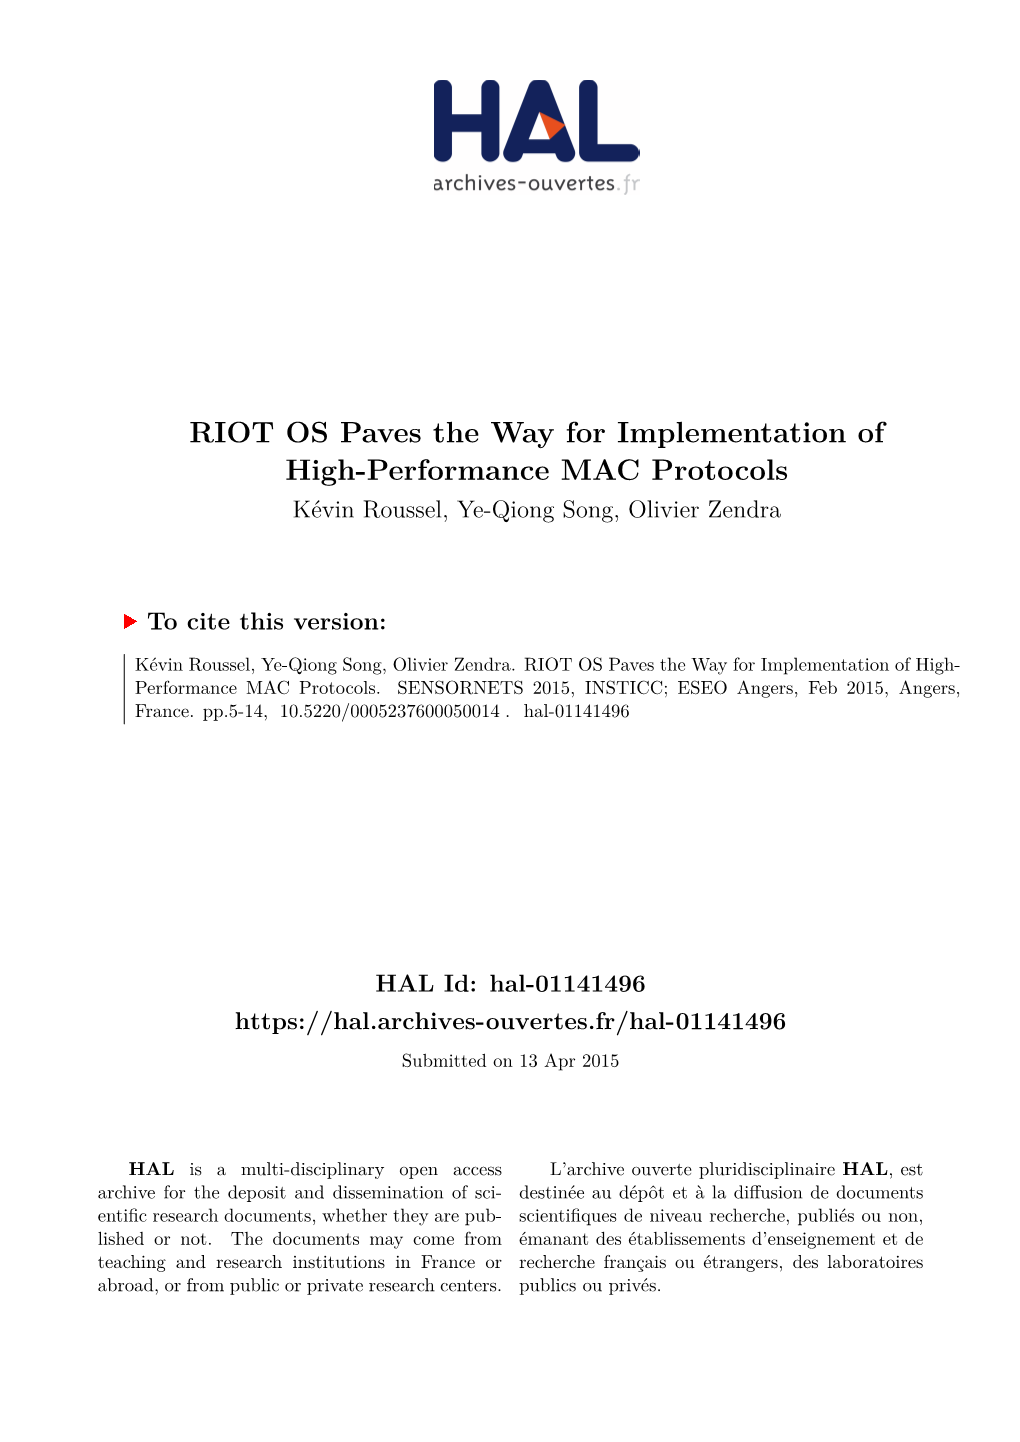 RIOT OS Paves the Way for Implementation of High-Performance MAC Protocols Kévin Roussel, Ye-Qiong Song, Olivier Zendra